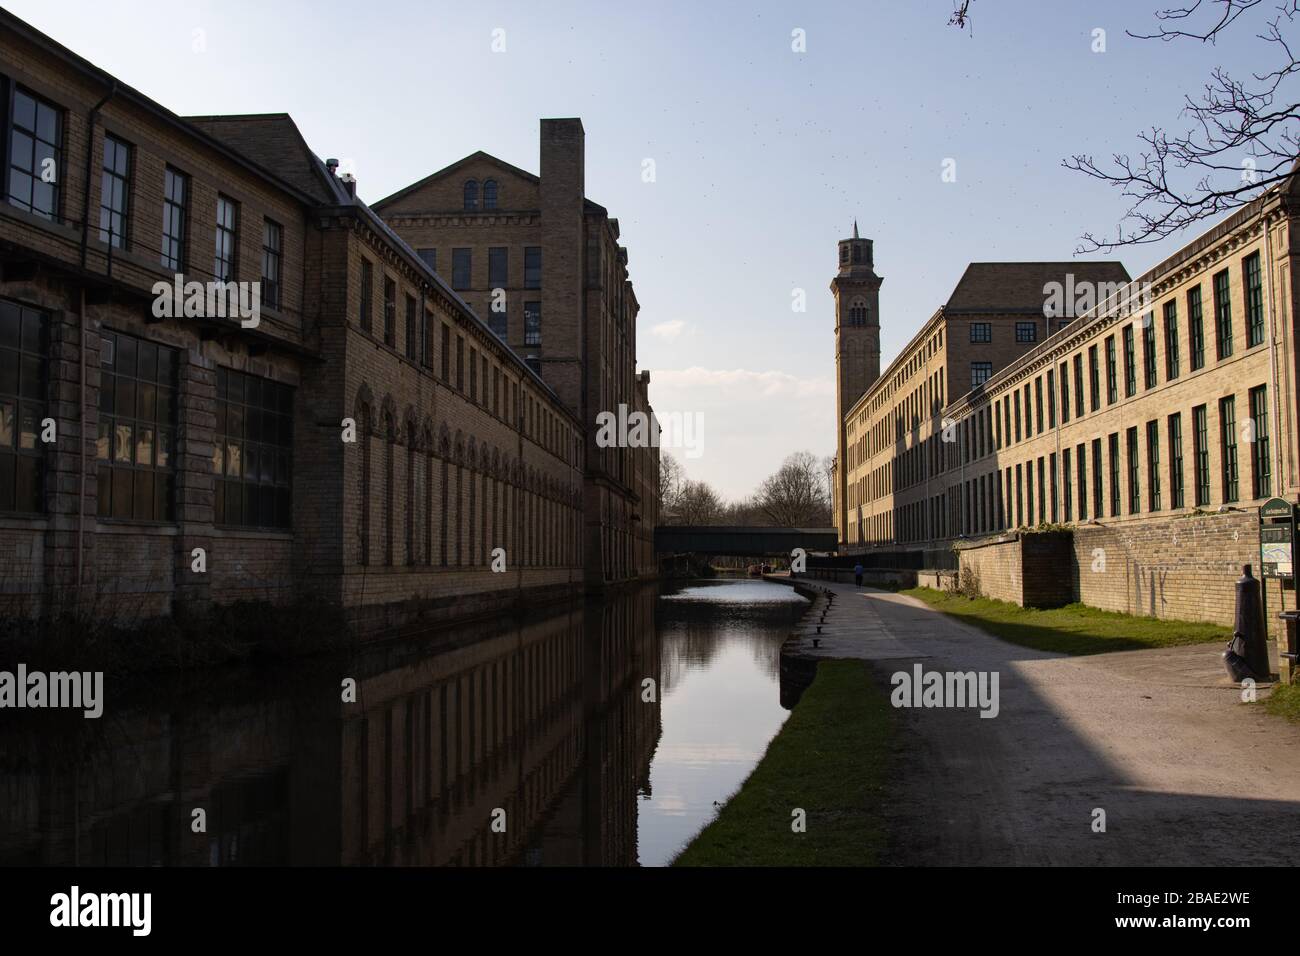 SALTAIRE, ENGLAND - 25/3/2020 - Salts Mill (left) shown parallel to New Mill (right) separated by the canal between them, during the COVID-19 lockdown Stock Photo